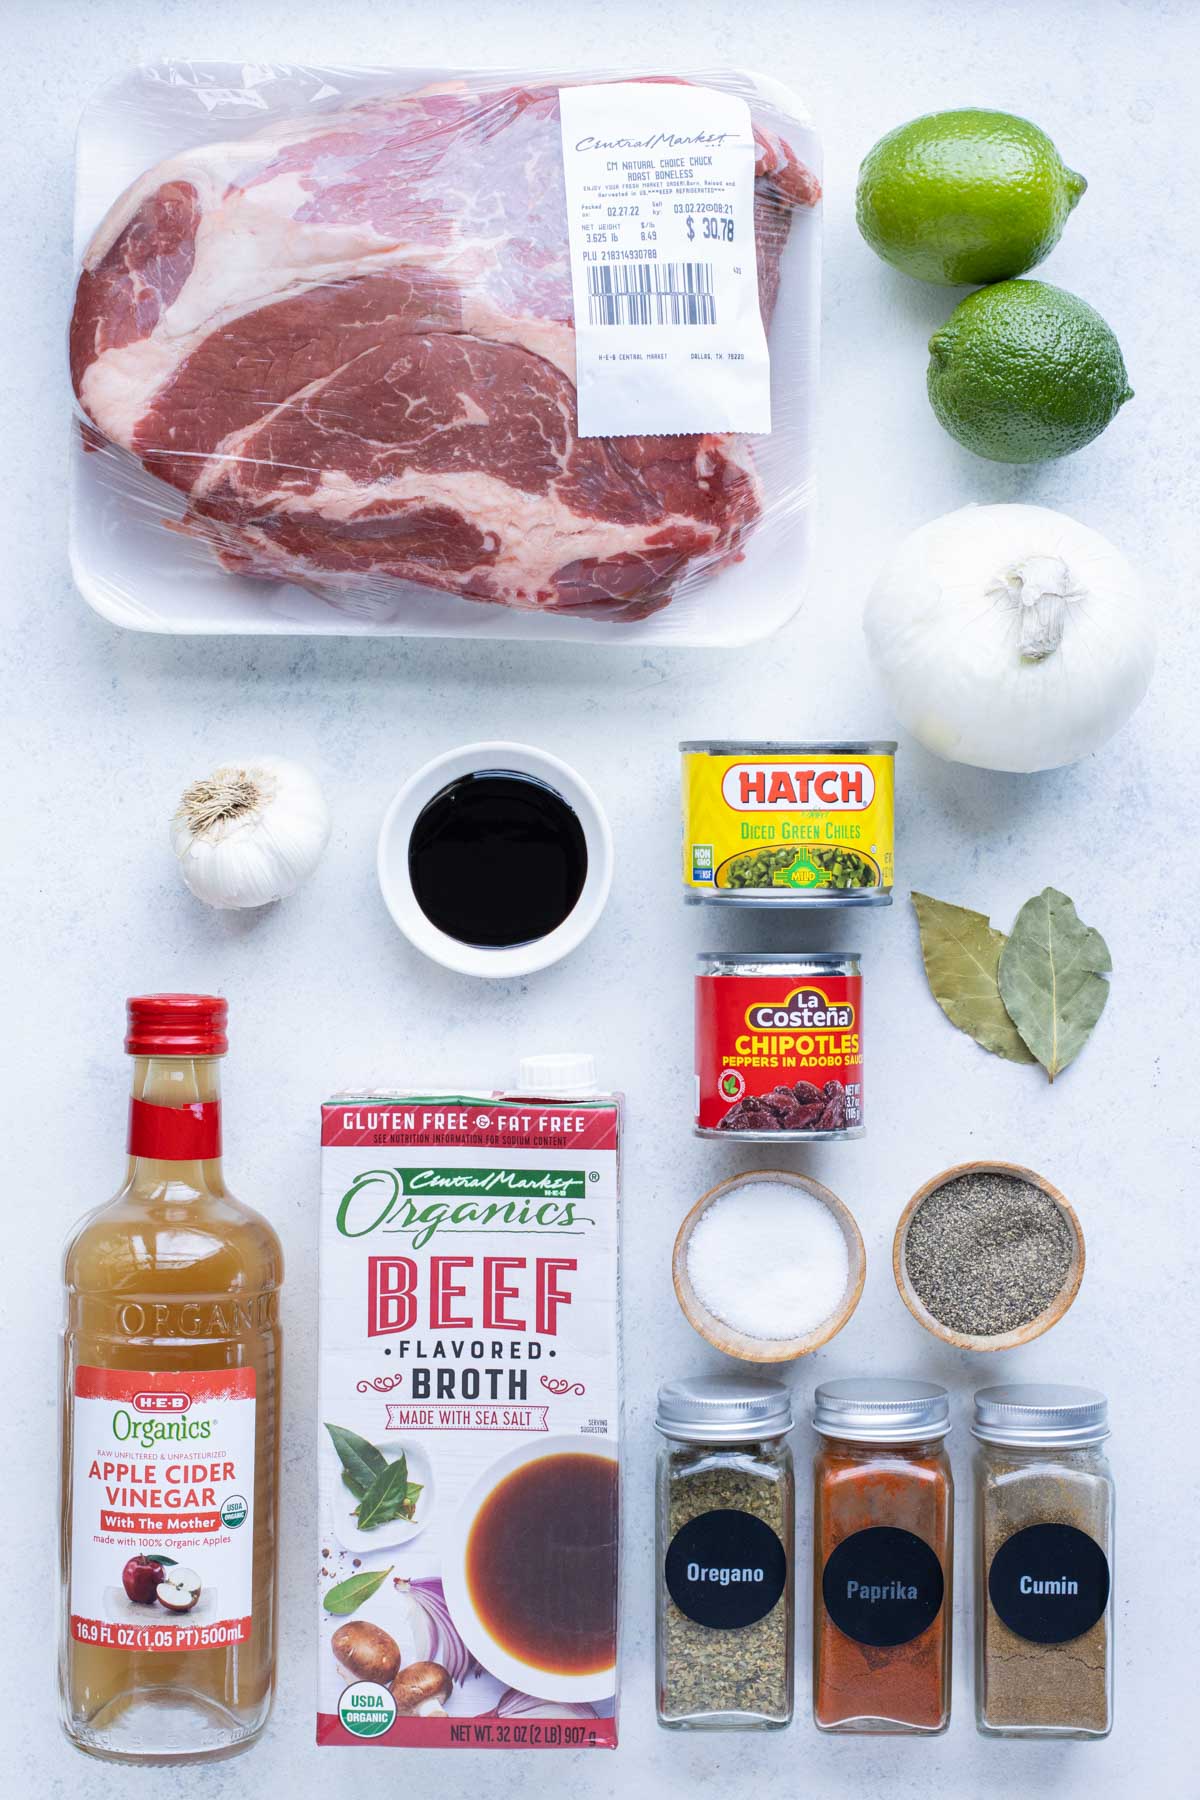 Chuck roast, chipotle chilis, broth, vinegar, molasses, limes, bay leaves, garlic, onion, green chilis, and seasonings are the ingredients for this recipe,